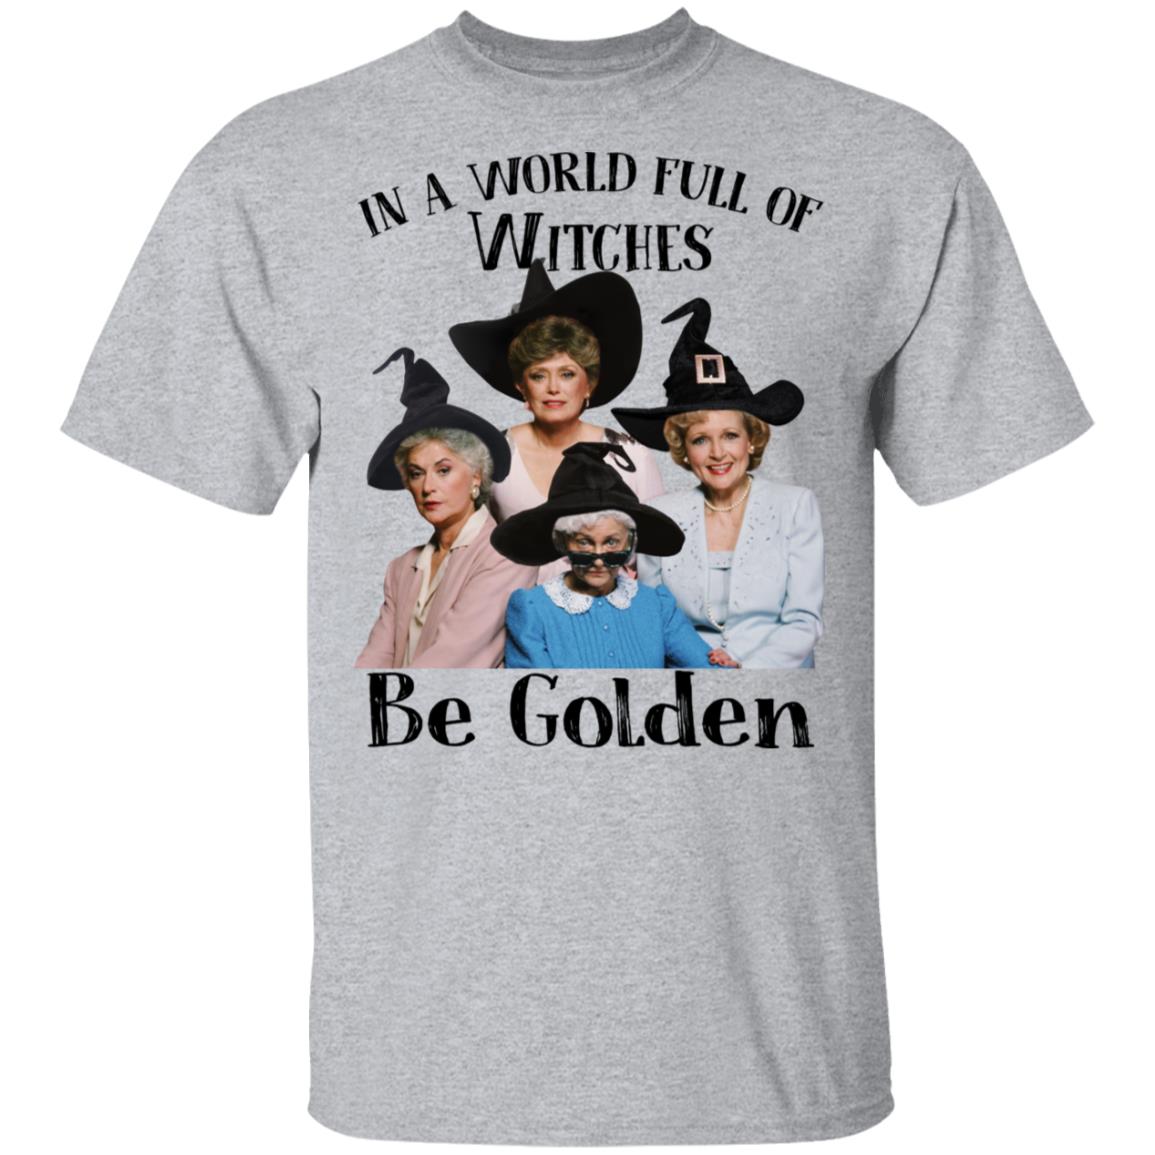 Halloween The Golden Girls in a world full of witches be Golden shirts - RobinPlaceFabrics